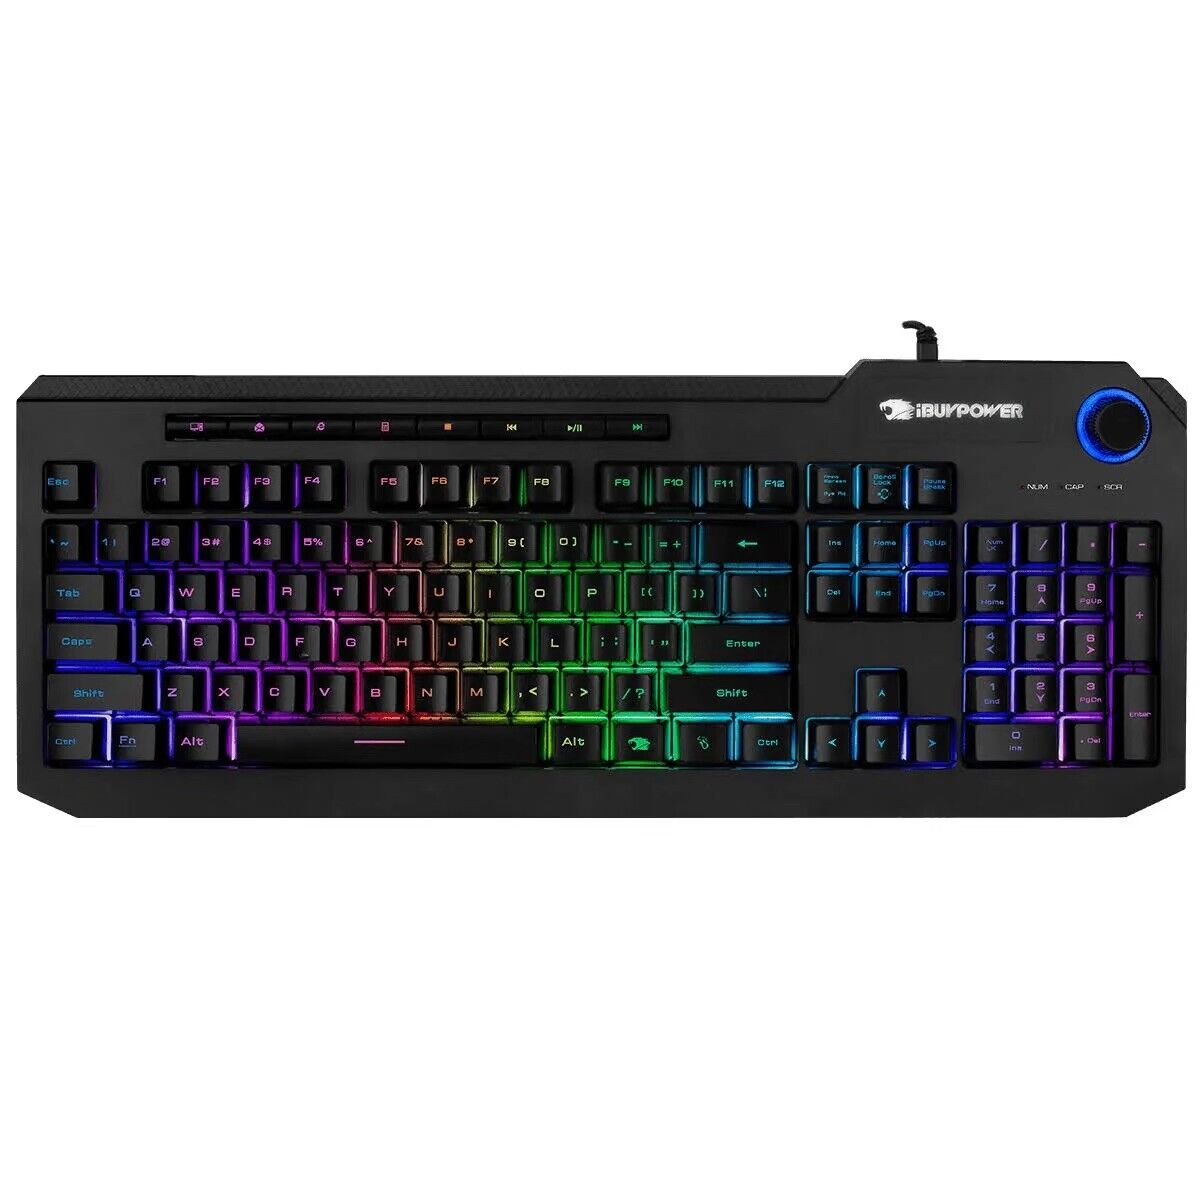 iBuyPower IBP Ares M2 Gaming Keyboard RGB Lighting- Spill Resistant - New In Box